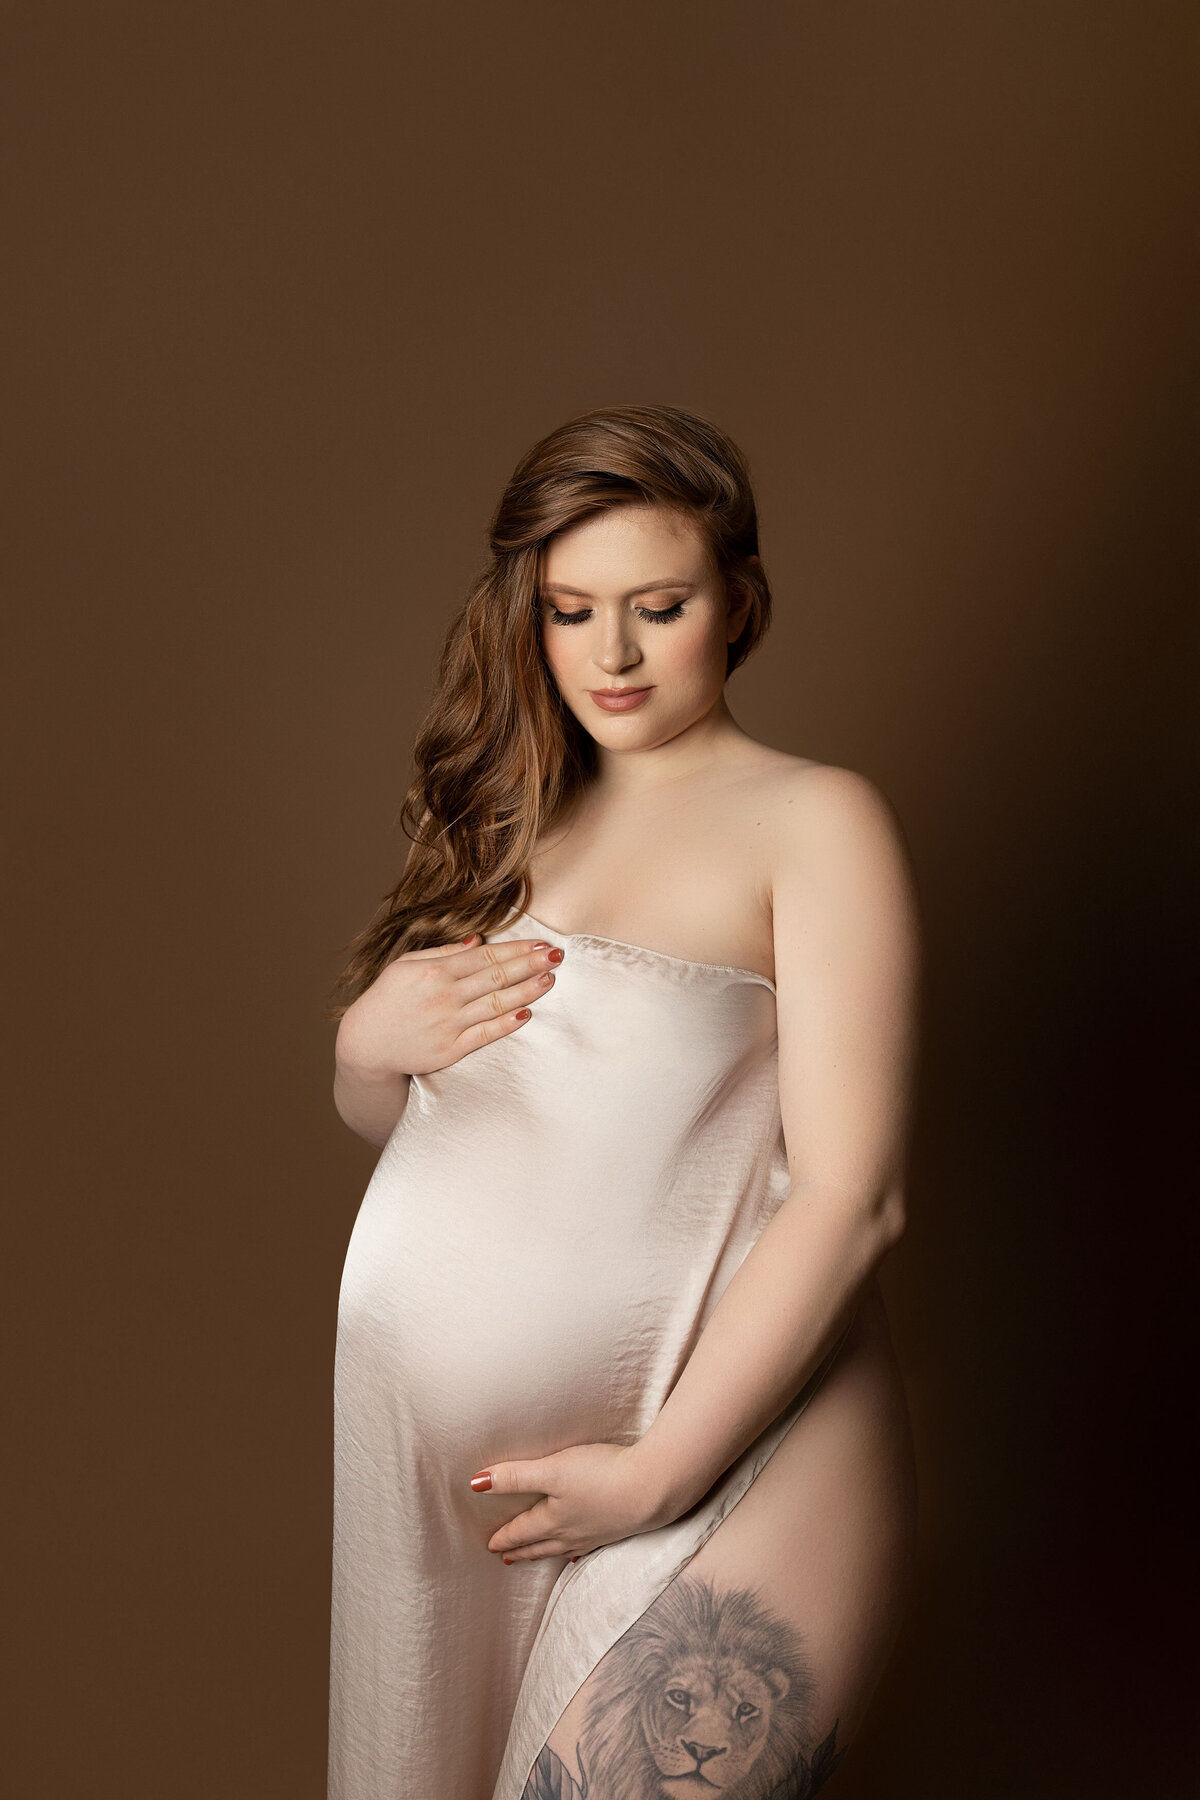 Maternity photos in top London, Ontario studio. Ogg Photography captures woman with long red hair sweeping over her shoulder. The woman is draped in cream-coloured silk fabric with one hand over her breast and the other under her baby bump. Her front leg is exposed bearing a lion tattoo.